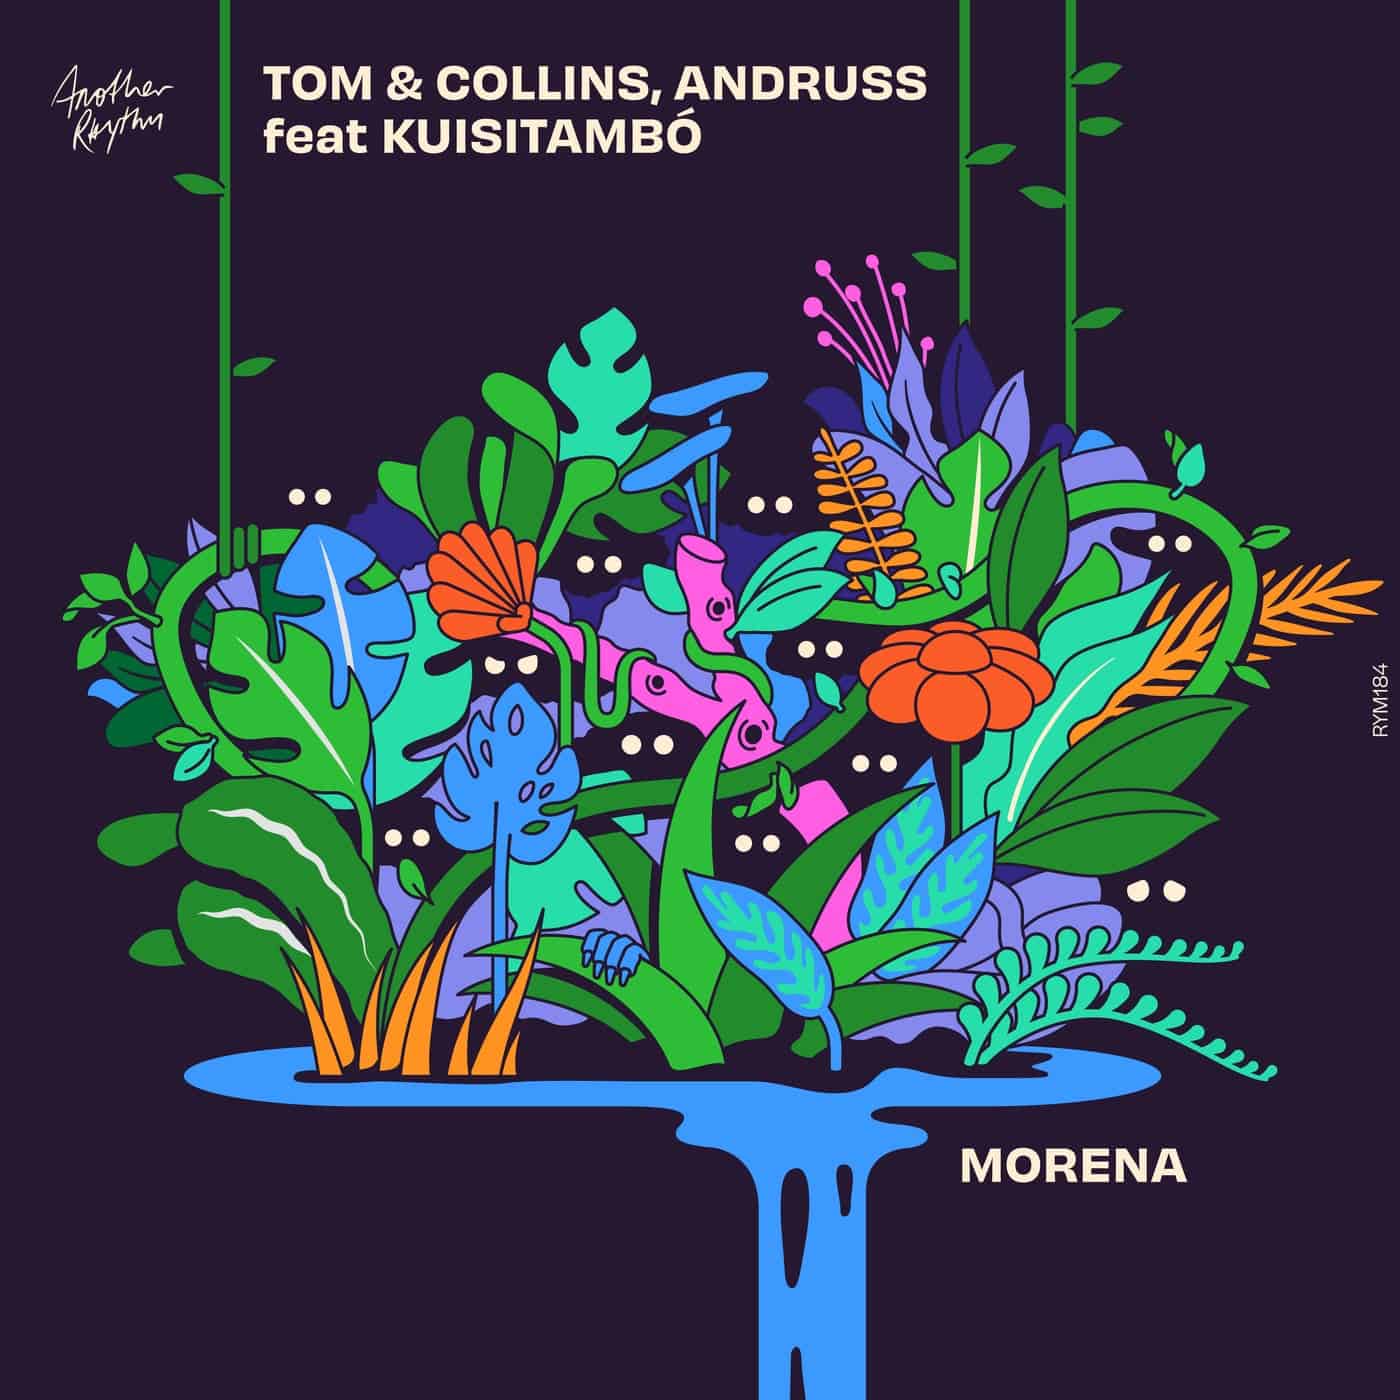 image cover: Morena by Andruss, Tom & Collins, Kuisitambo on Another Rhythm Records